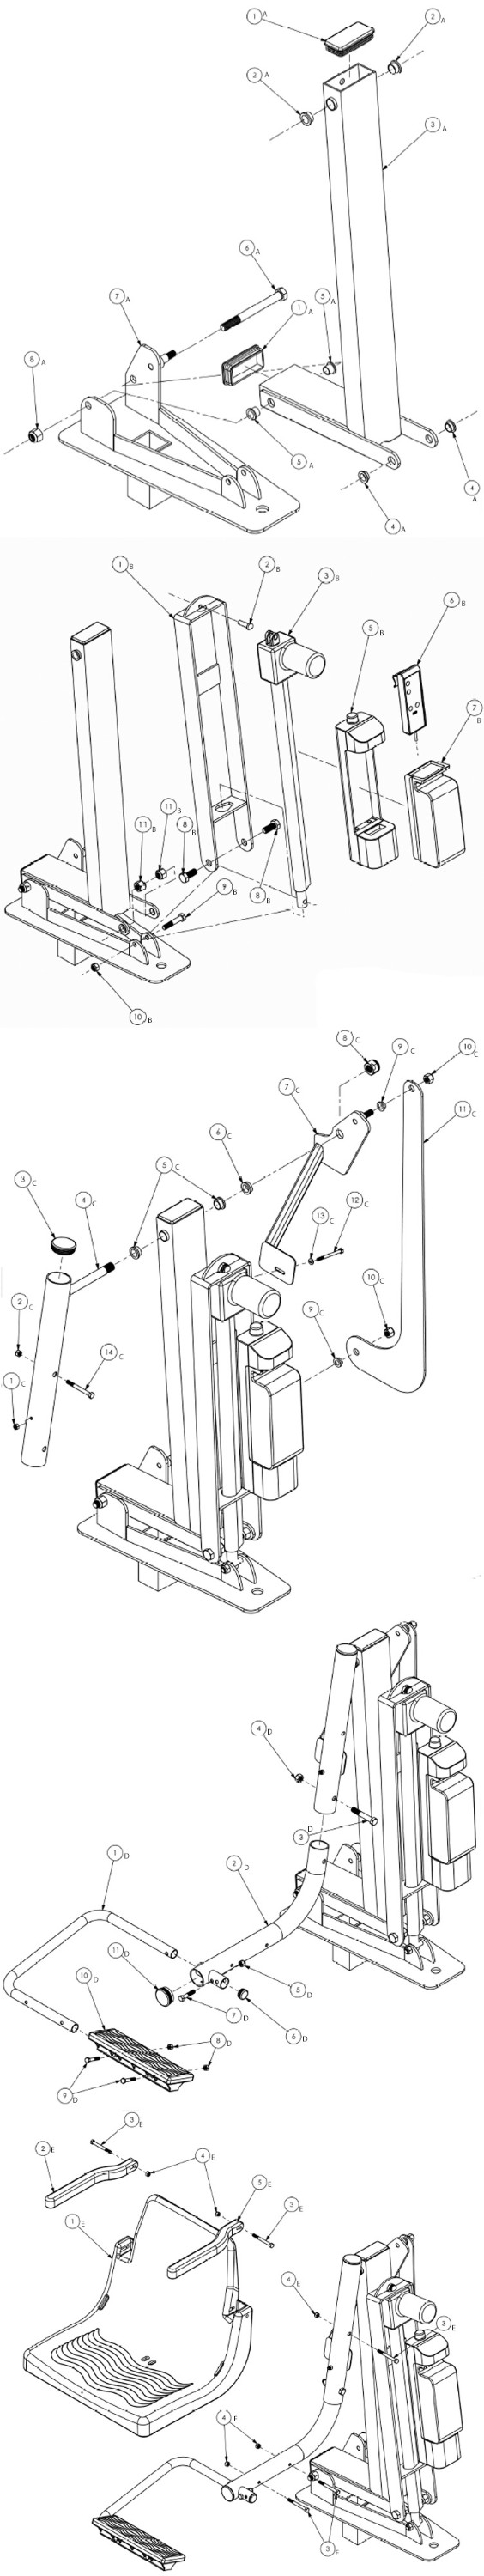 Global Pool Products Proformance Series P-375 Pool Lift with Anchor | P375SL Parts Schematic